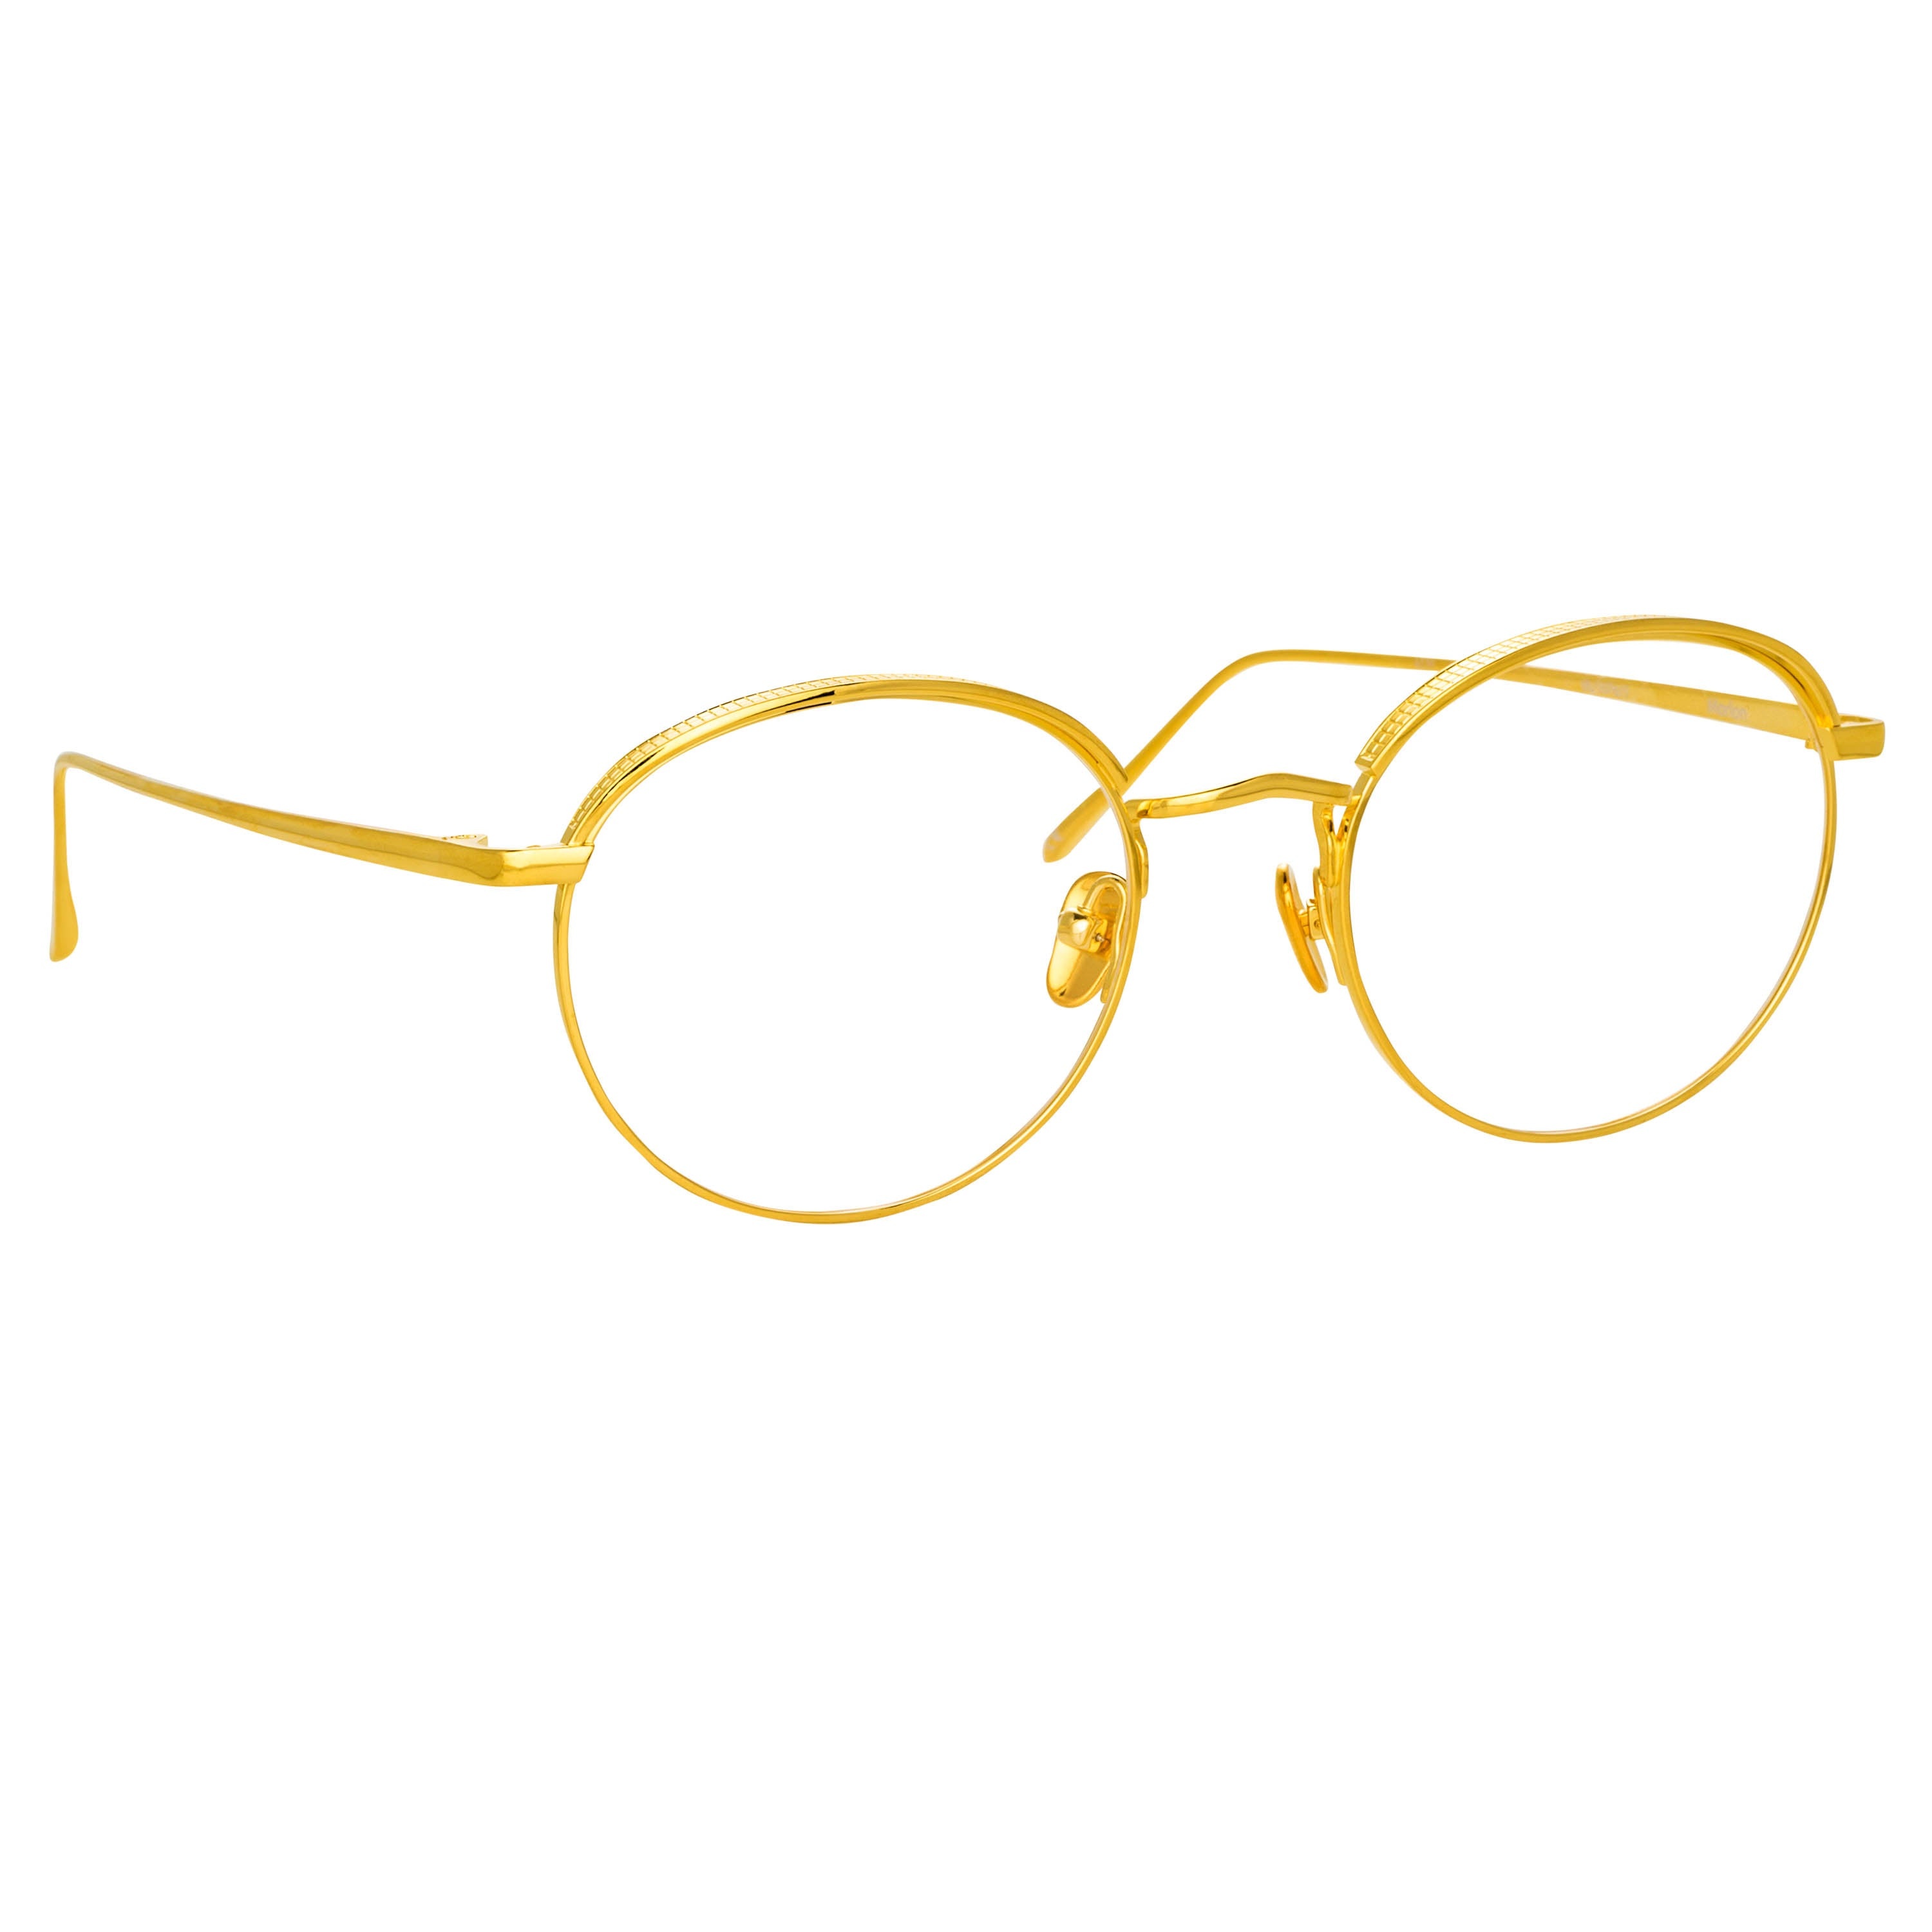 THE MARLON | OVAL OPTICAL FRAME IN YELLOW GOLD (C5) - 3